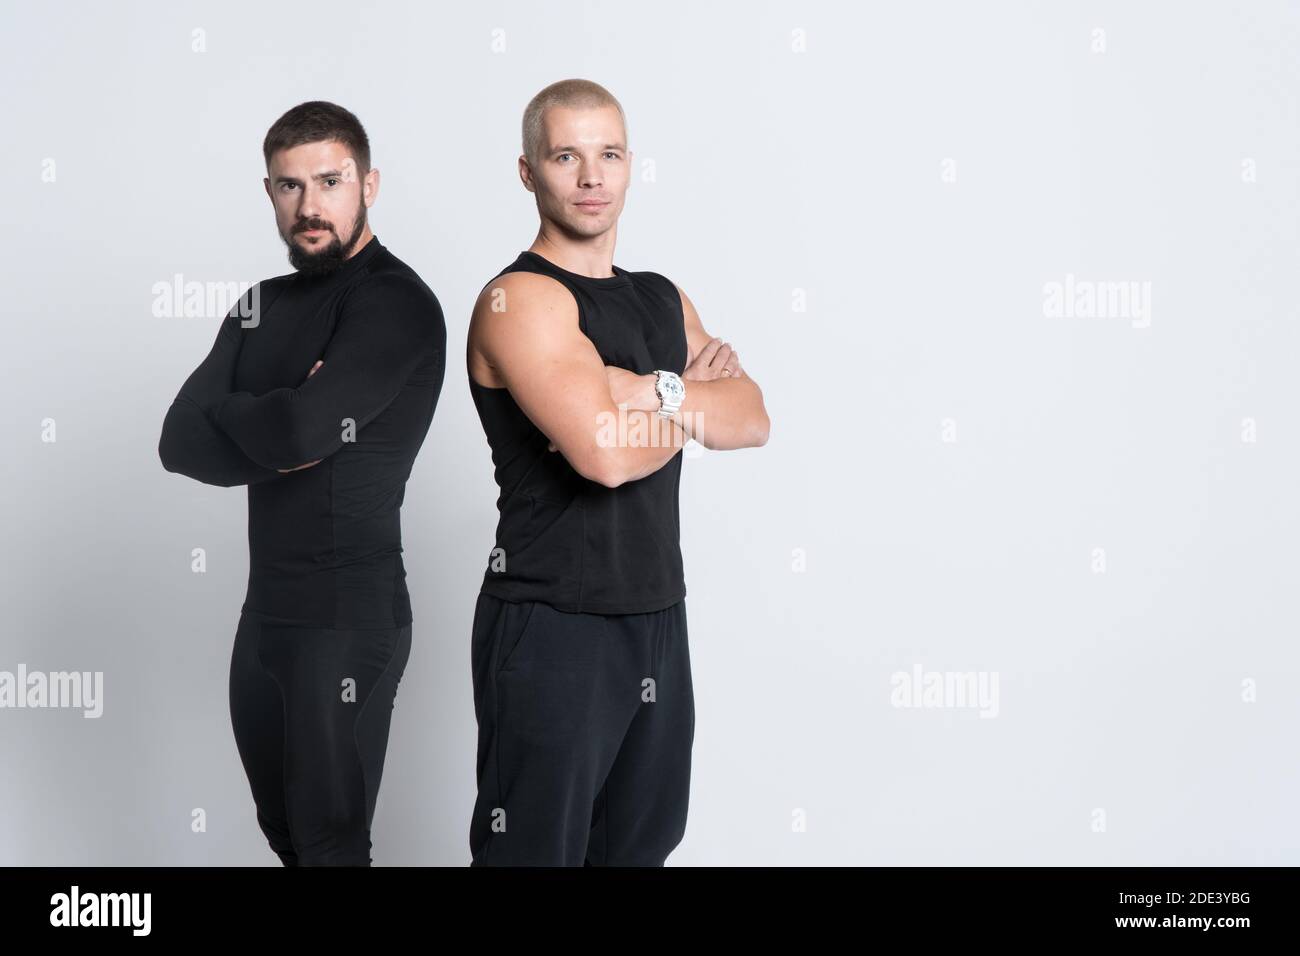 two athletic personal fitness trainers or bodybuilders on white background Stock Photo